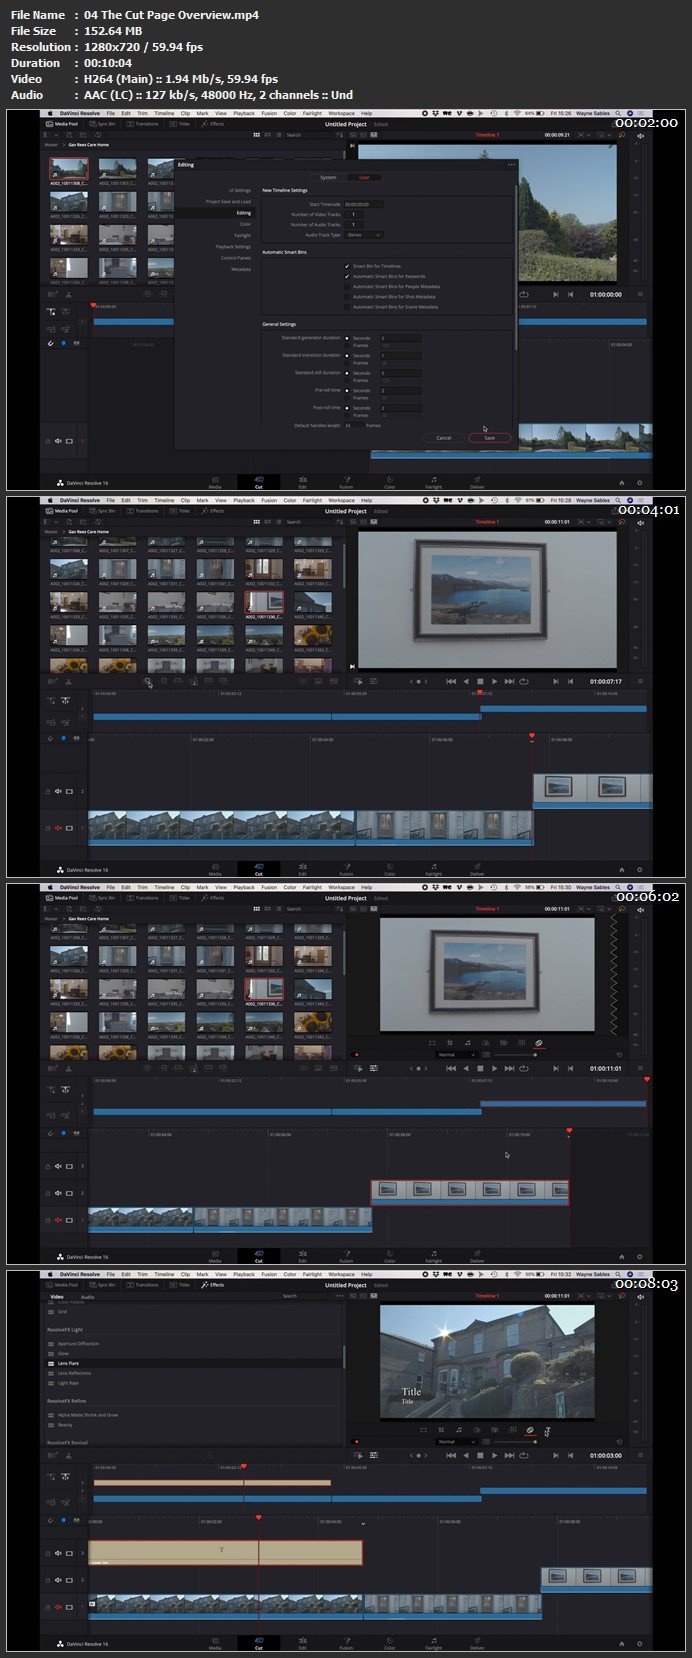 how to update davinci resolve 16 to 17